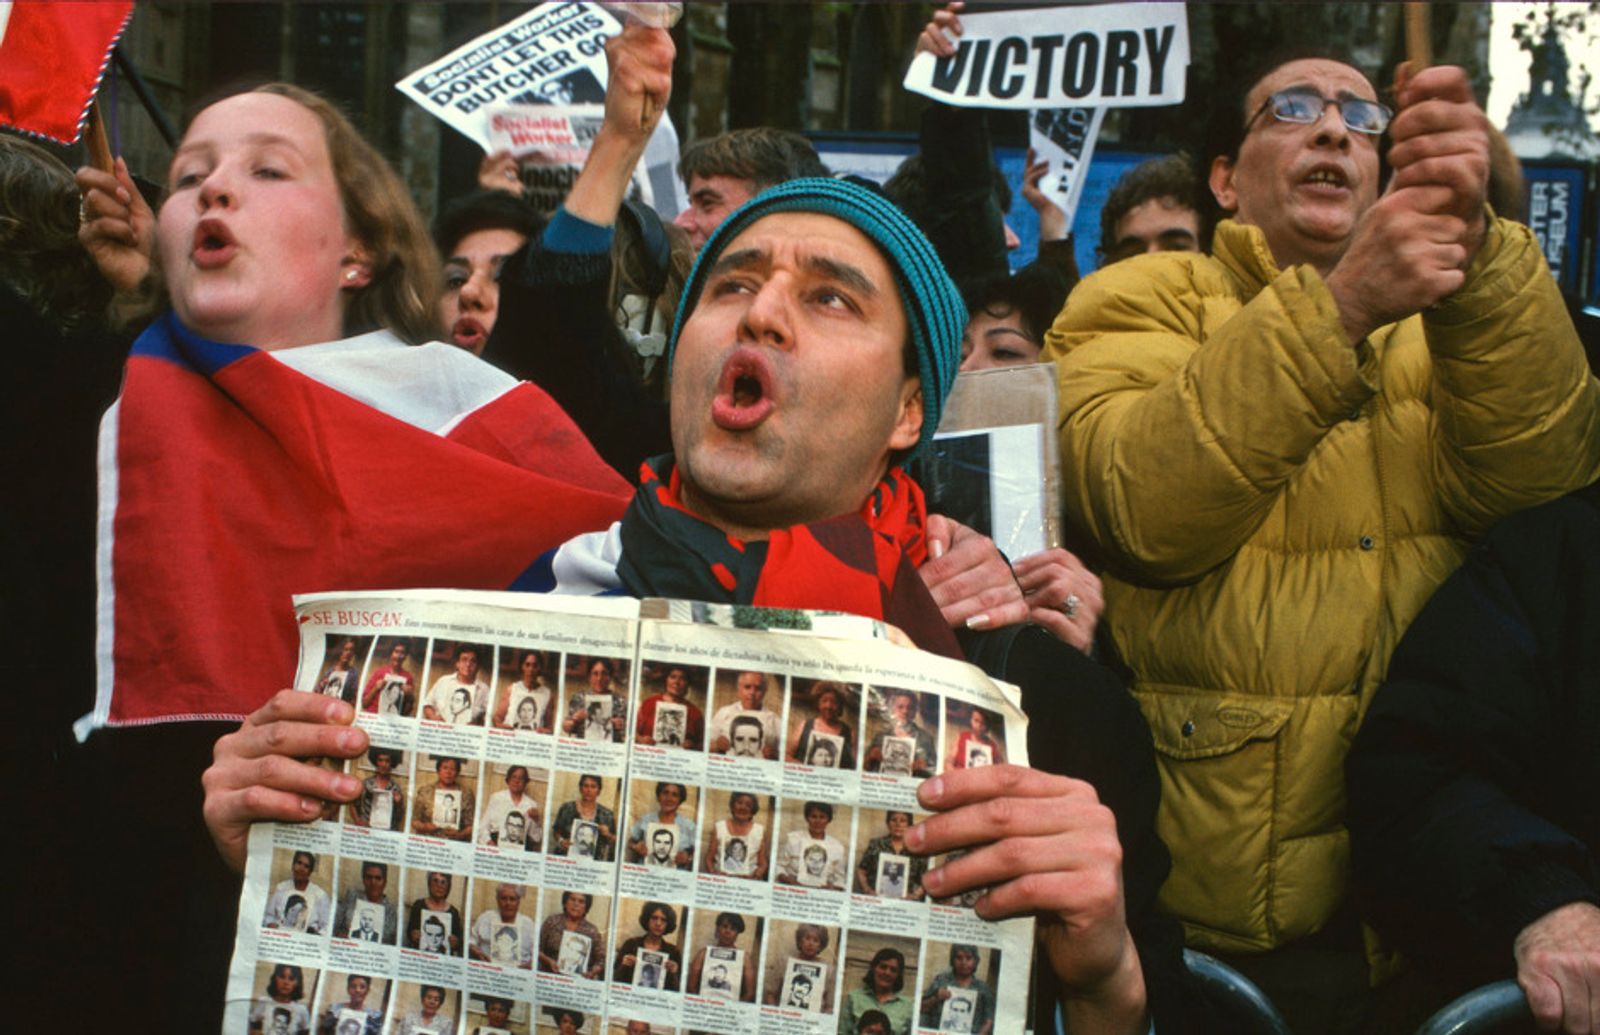 © Julio Etchart - Chilean expatriates celebrate the arrest of Pinochet for crimes against humanity in London, 1998